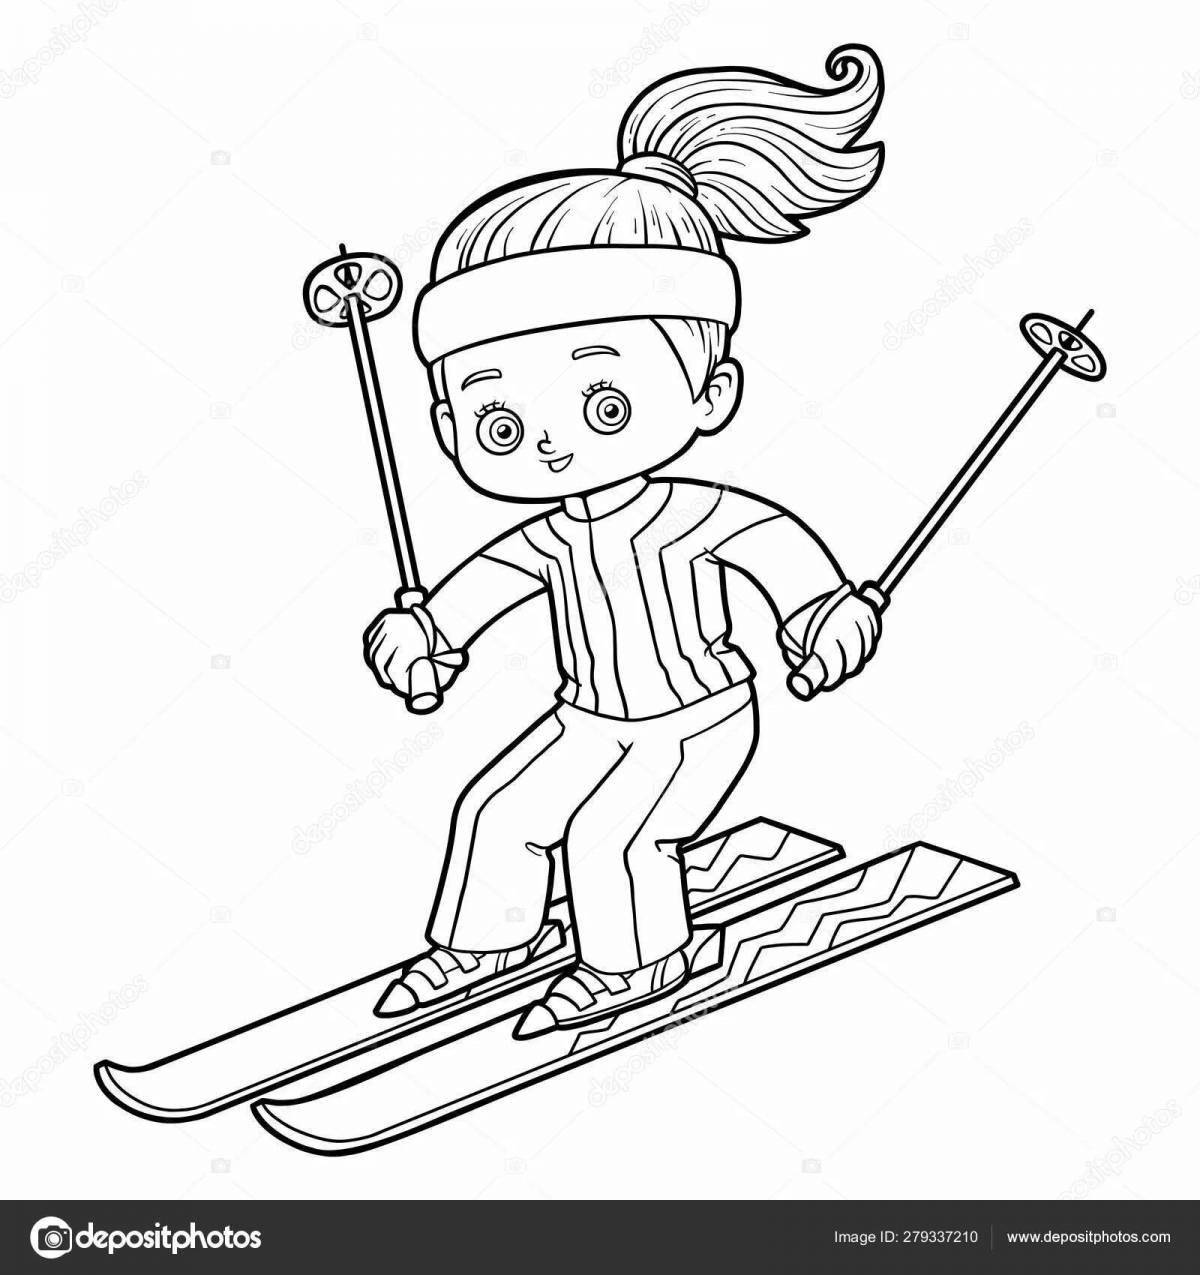 Coloring book playful skier for children 5-6 years old